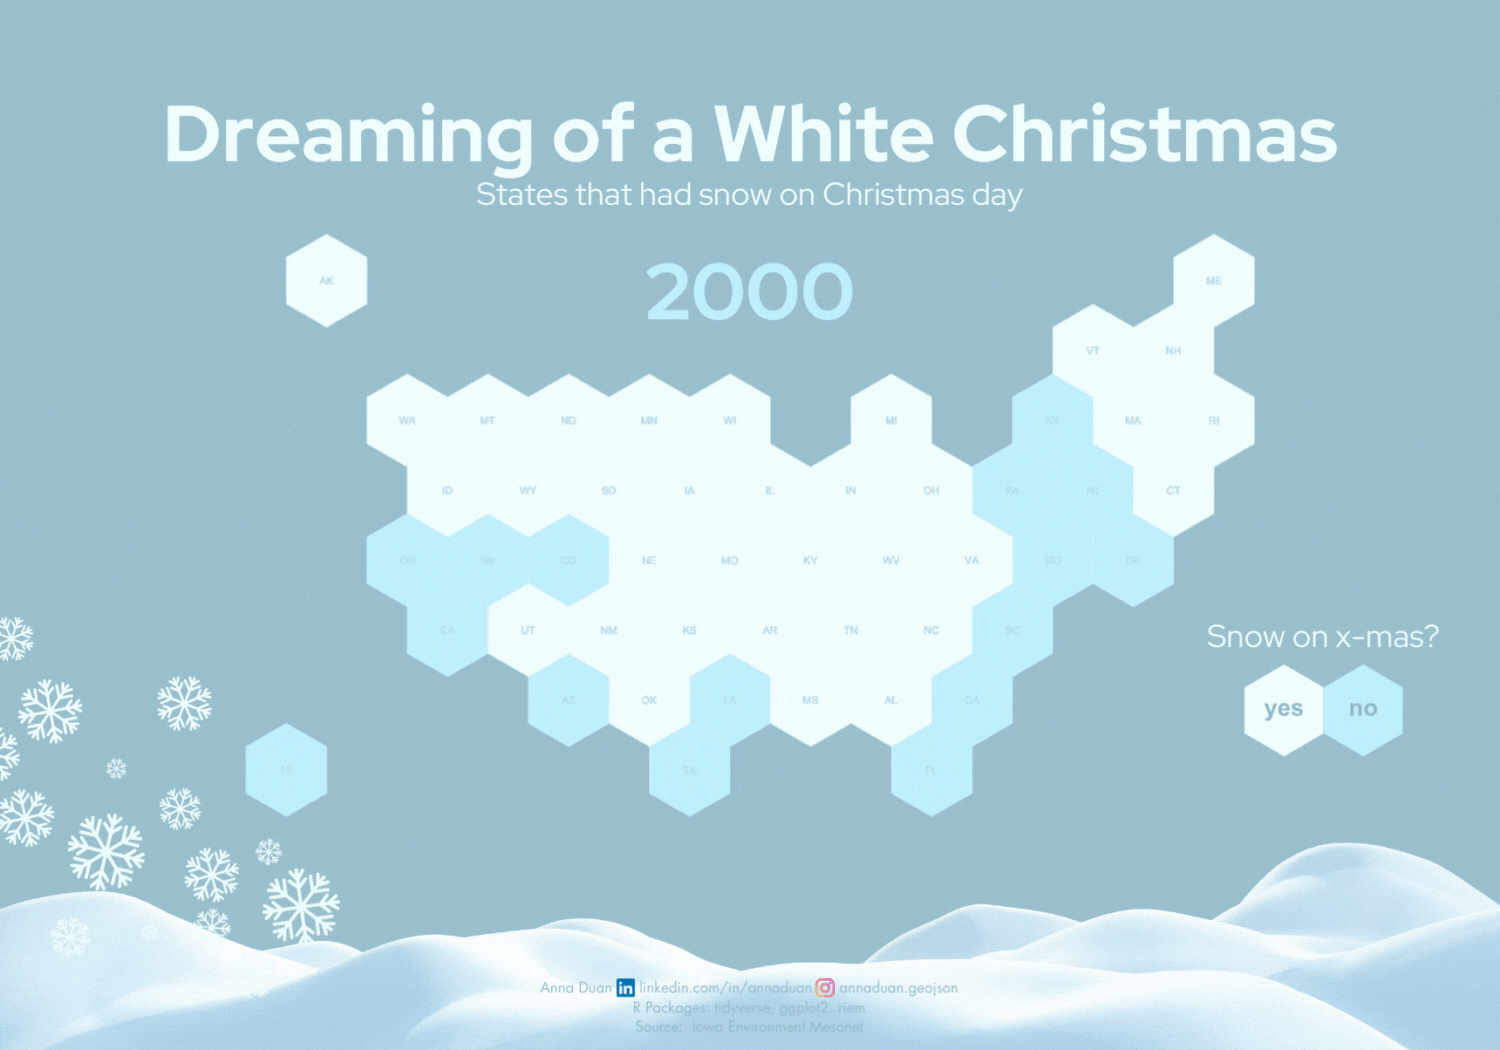 Dreaming of a White Christmas by Anna Duan